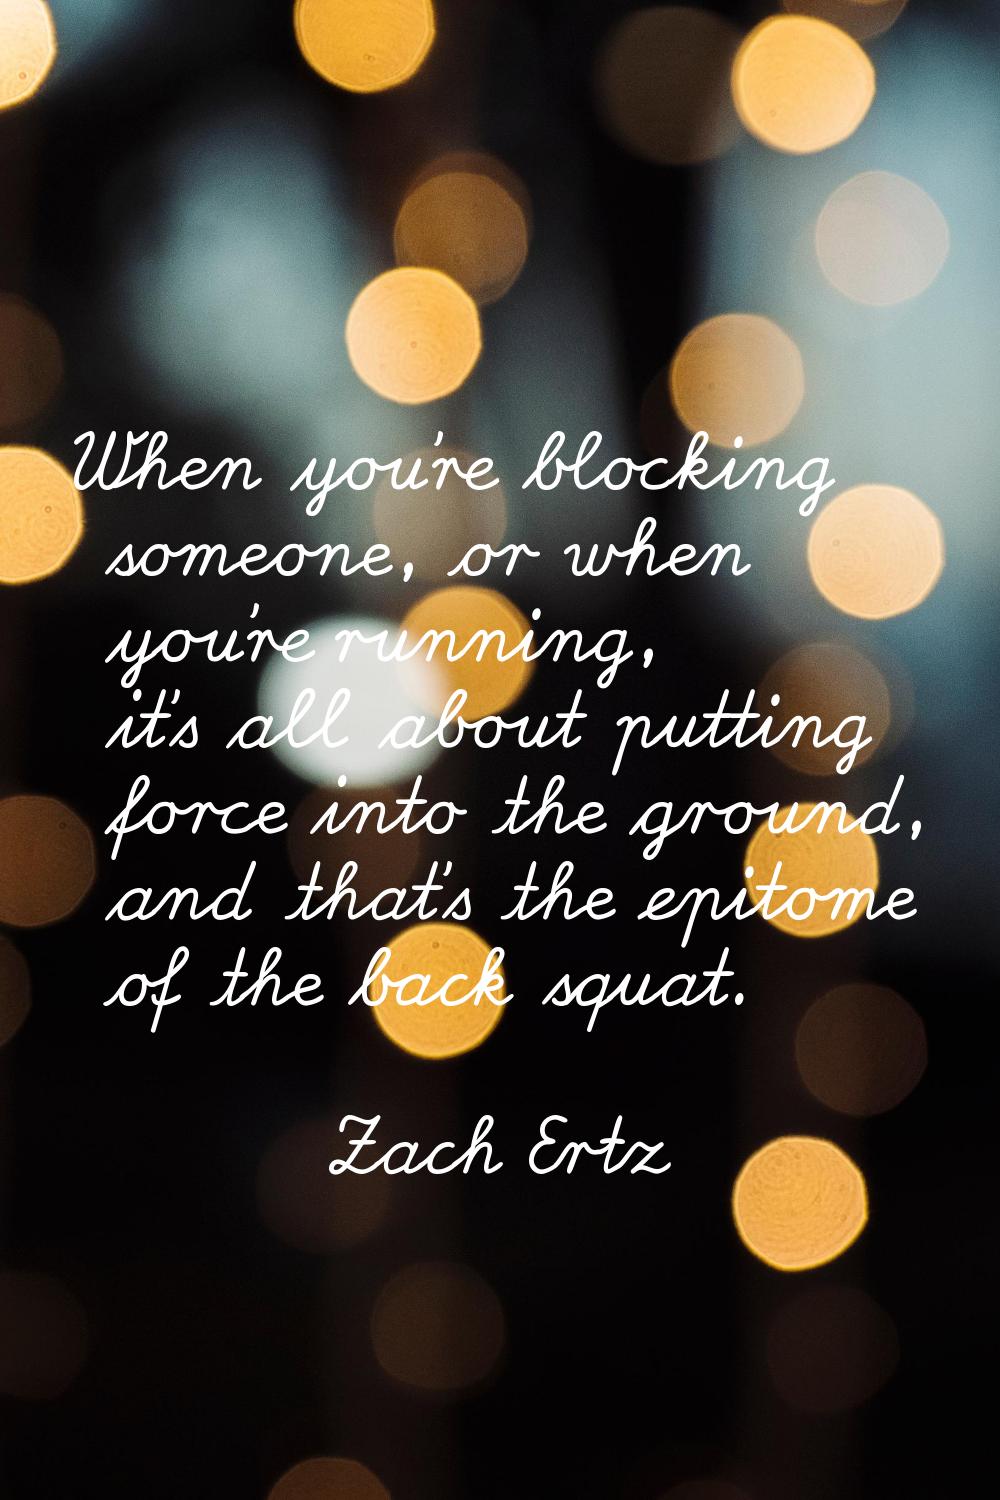 When you're blocking someone, or when you're running, it's all about putting force into the ground,